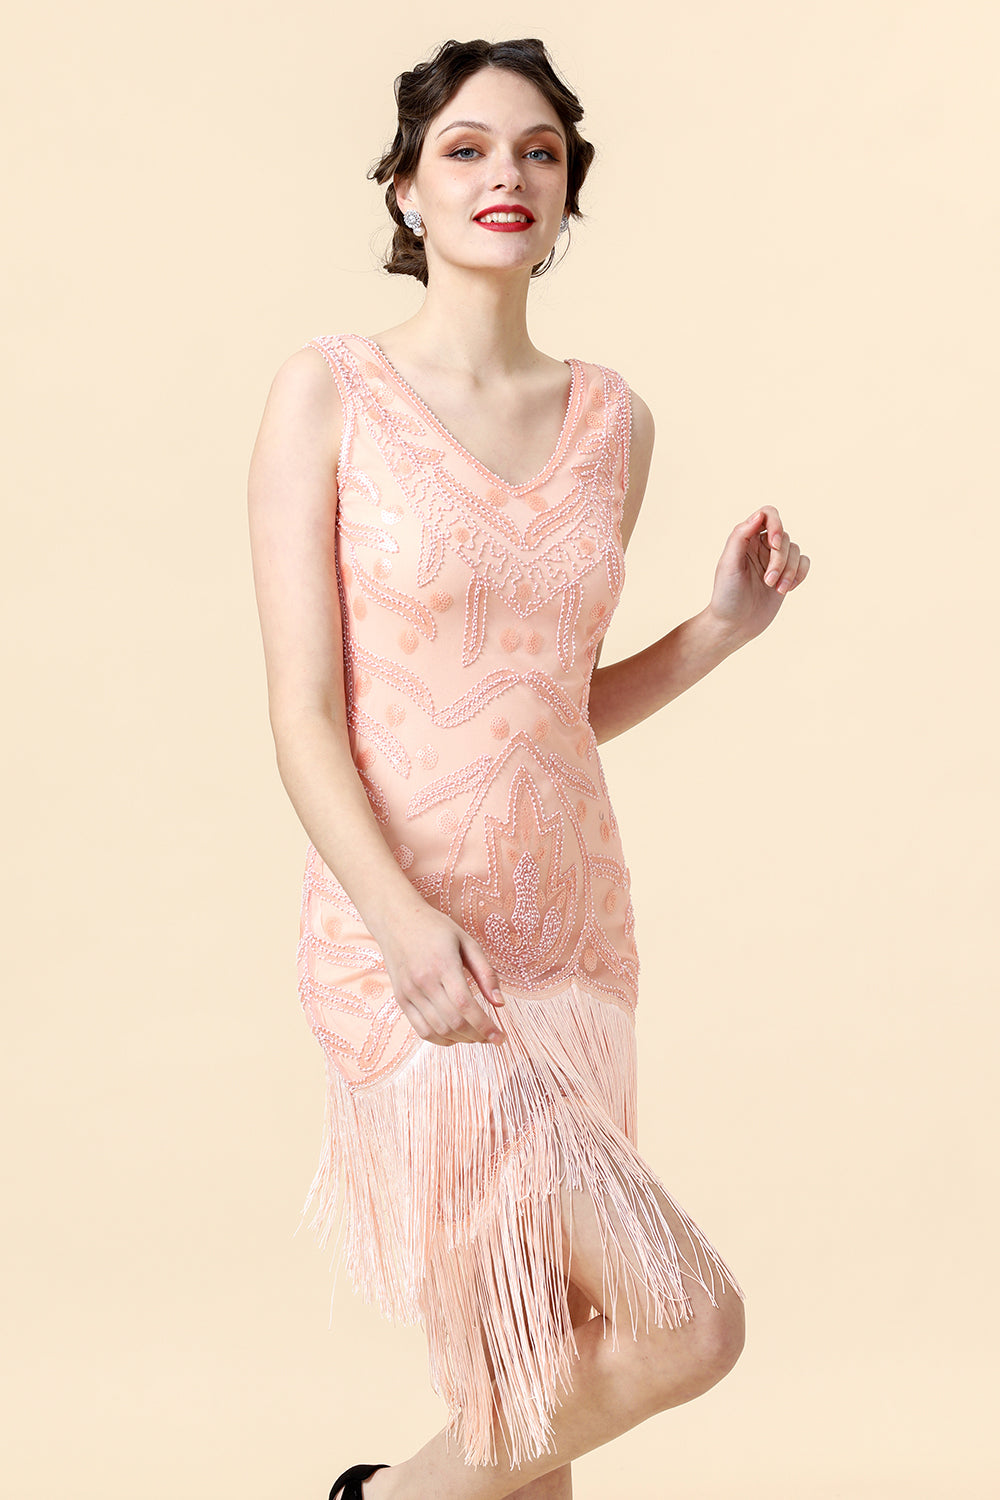 Beaded Pink Fringed Flapper Dress with 1920s Accessories Set